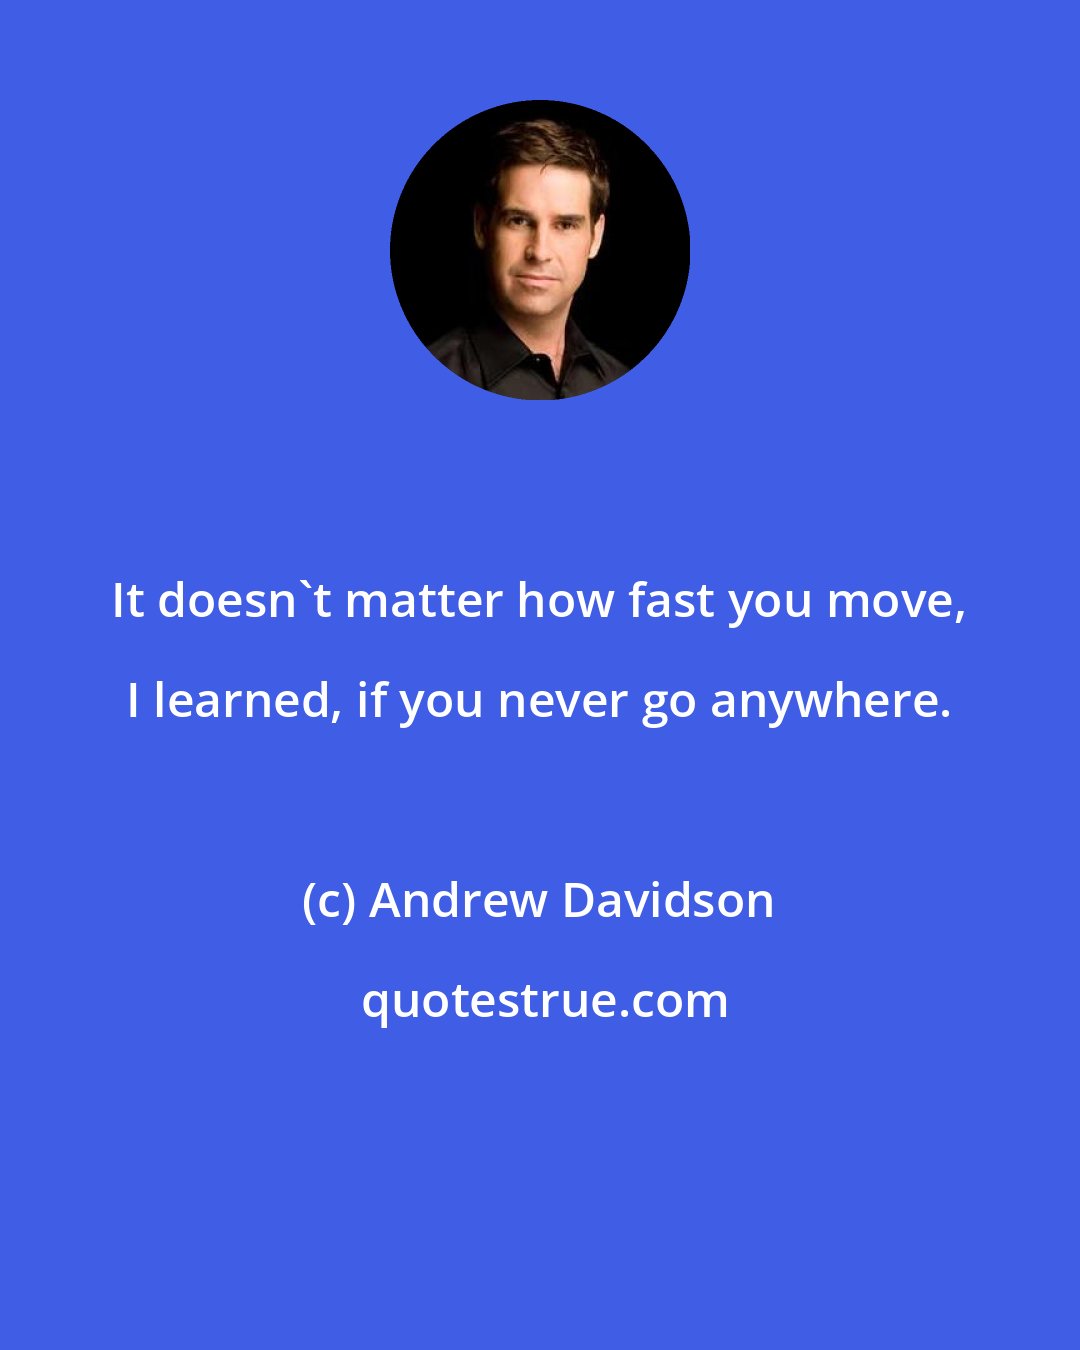 Andrew Davidson: It doesn't matter how fast you move, I learned, if you never go anywhere.